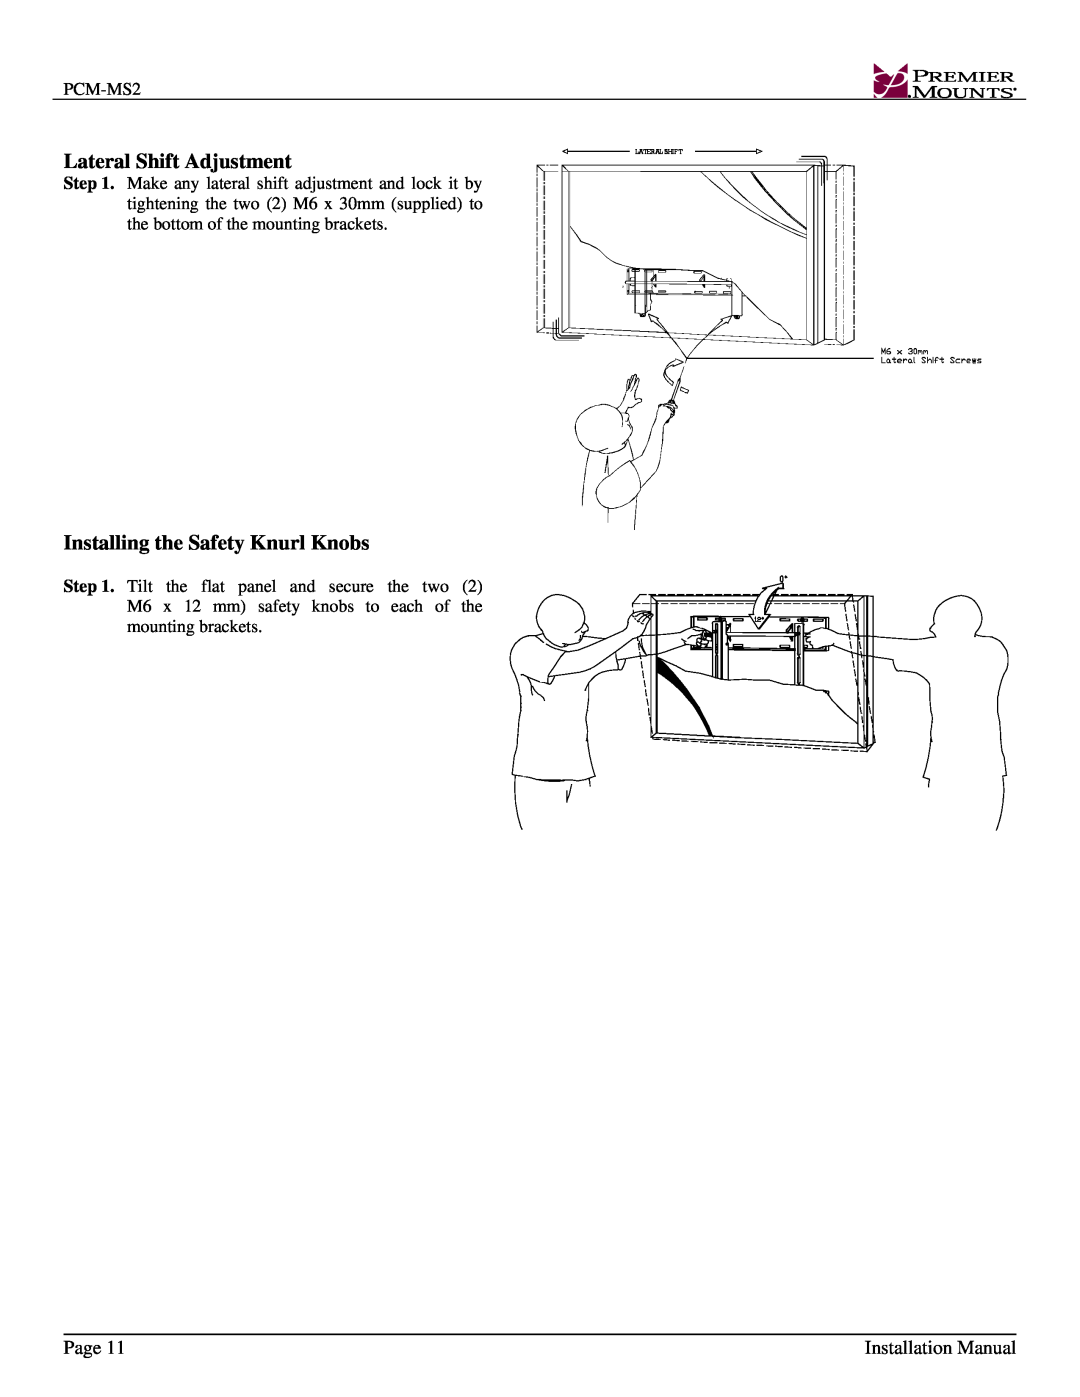 Premier Mounts PCM-MS2 installation instructions Page, Installation Manual 